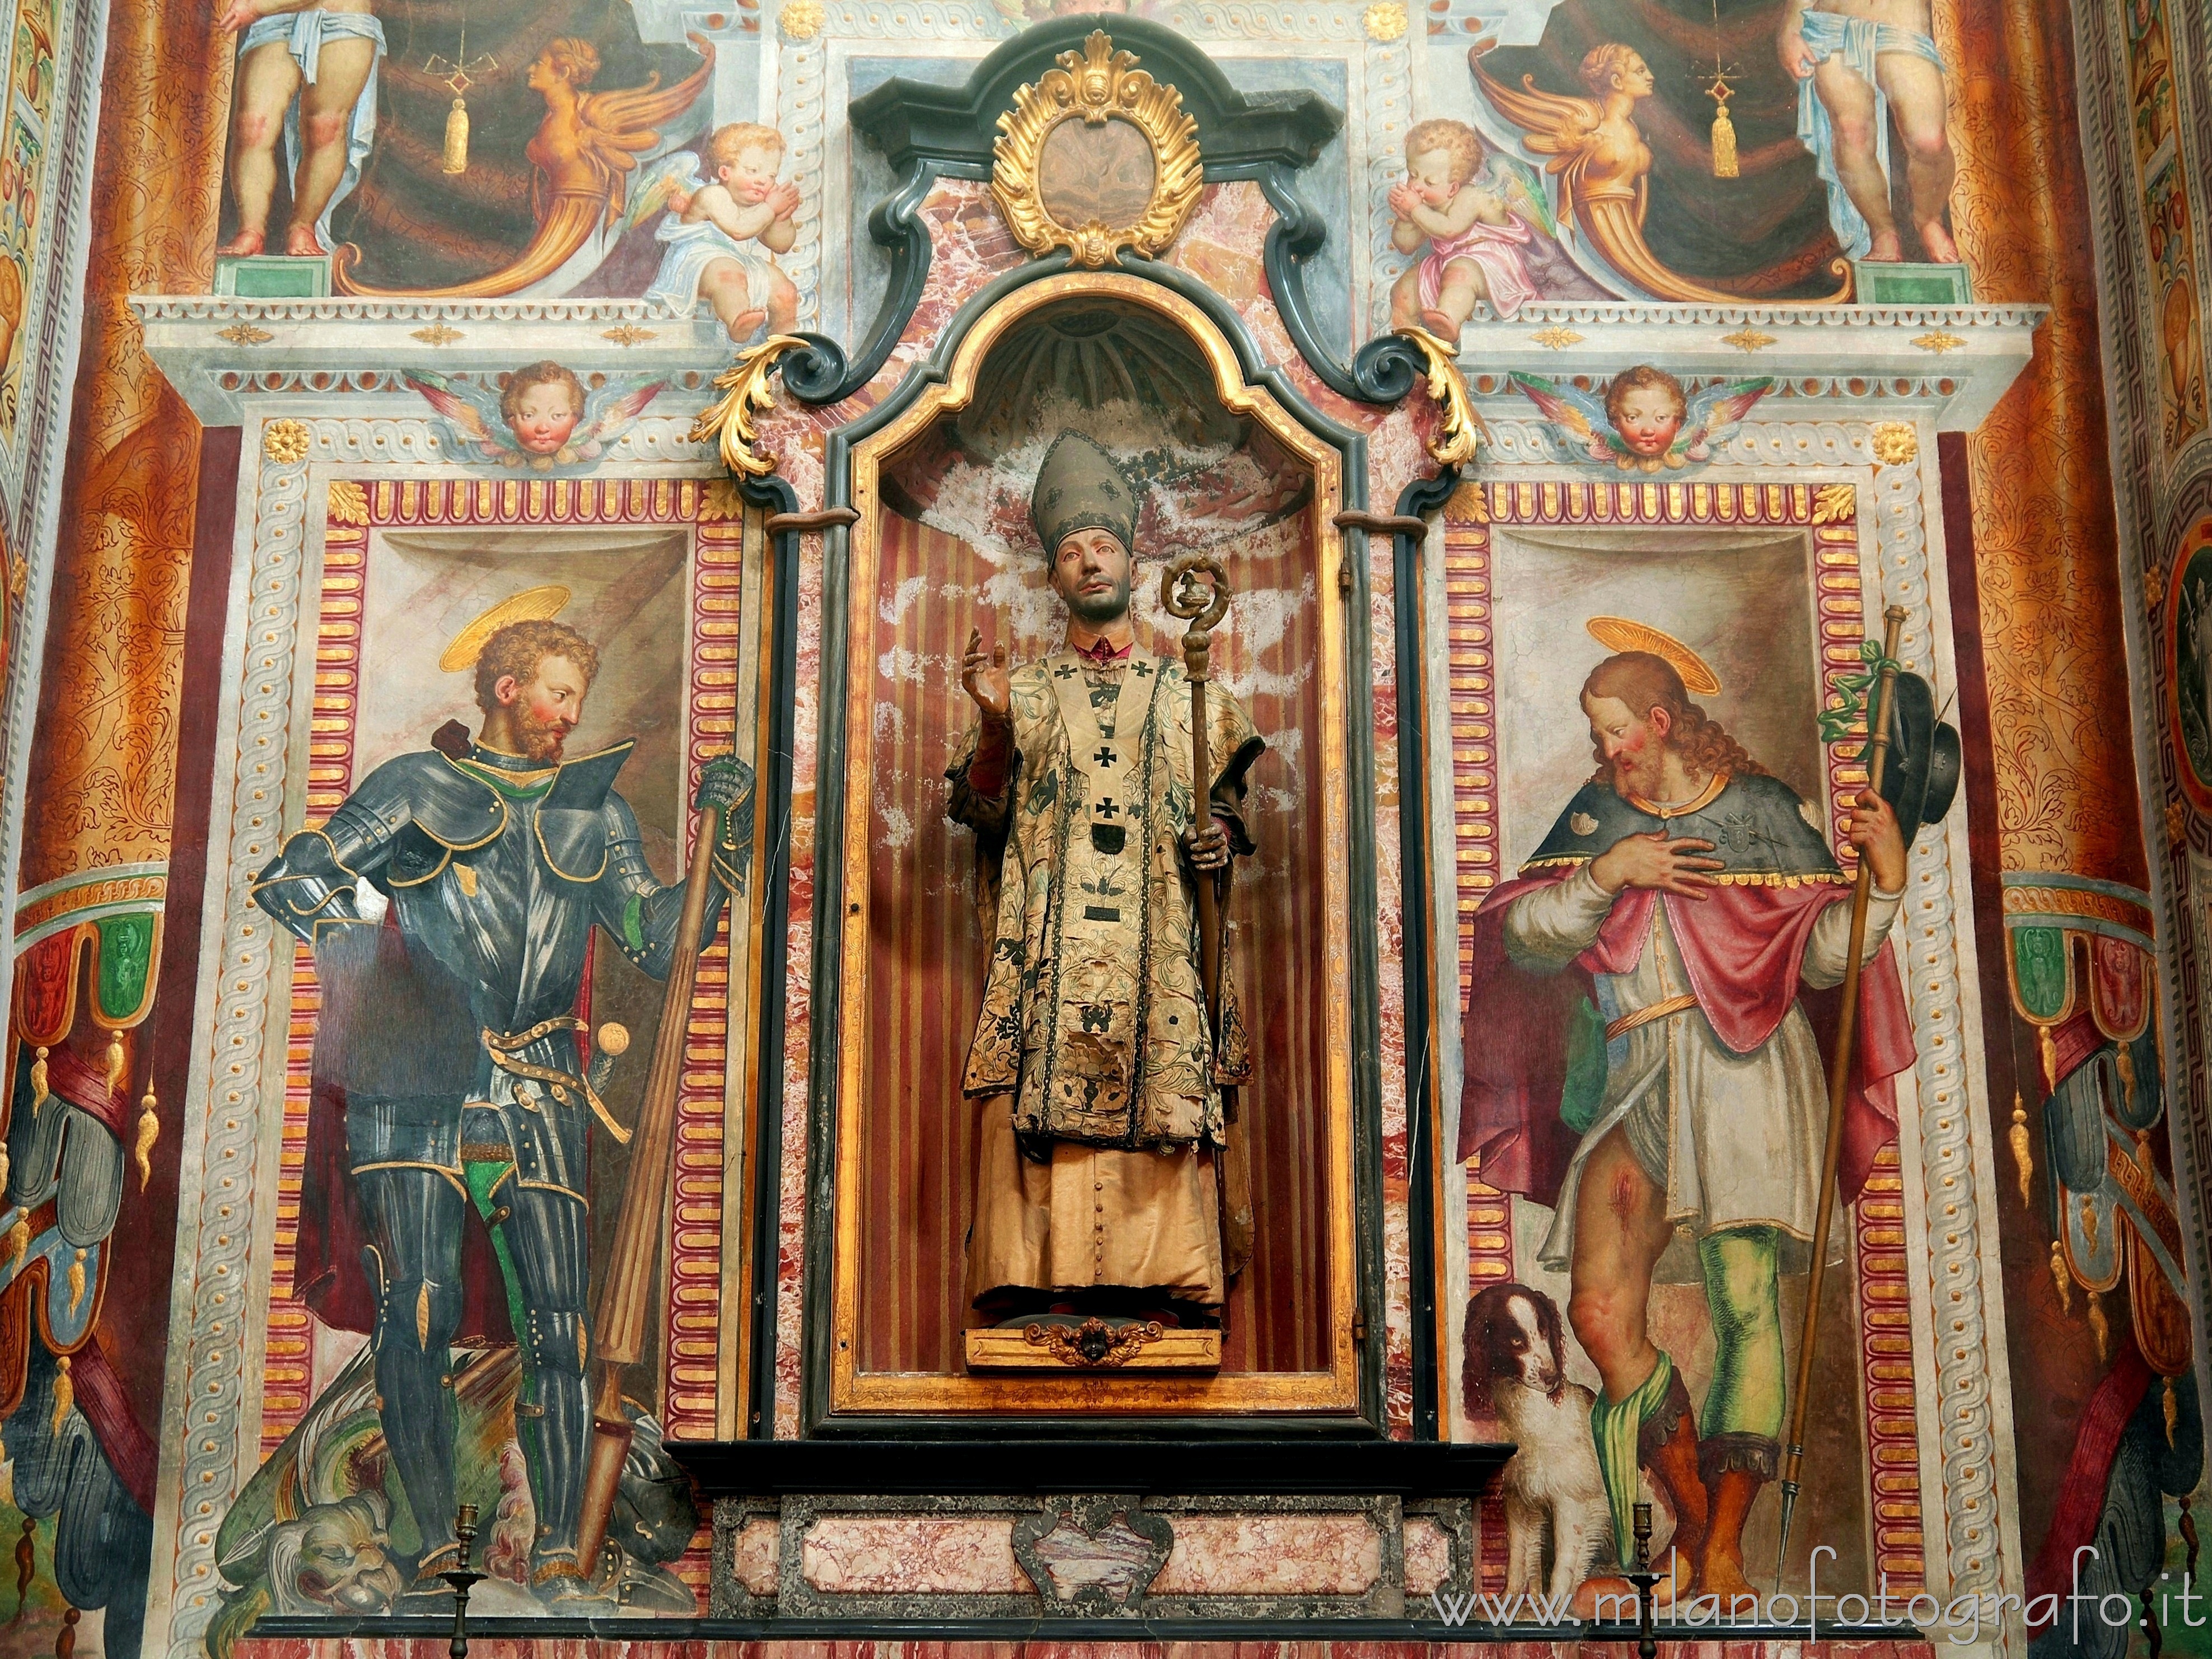 Meda (Monza e Brianza, Italy): Detail of the Chapel of San Carlo in the Church of San Vittore - Meda (Monza e Brianza, Italy)